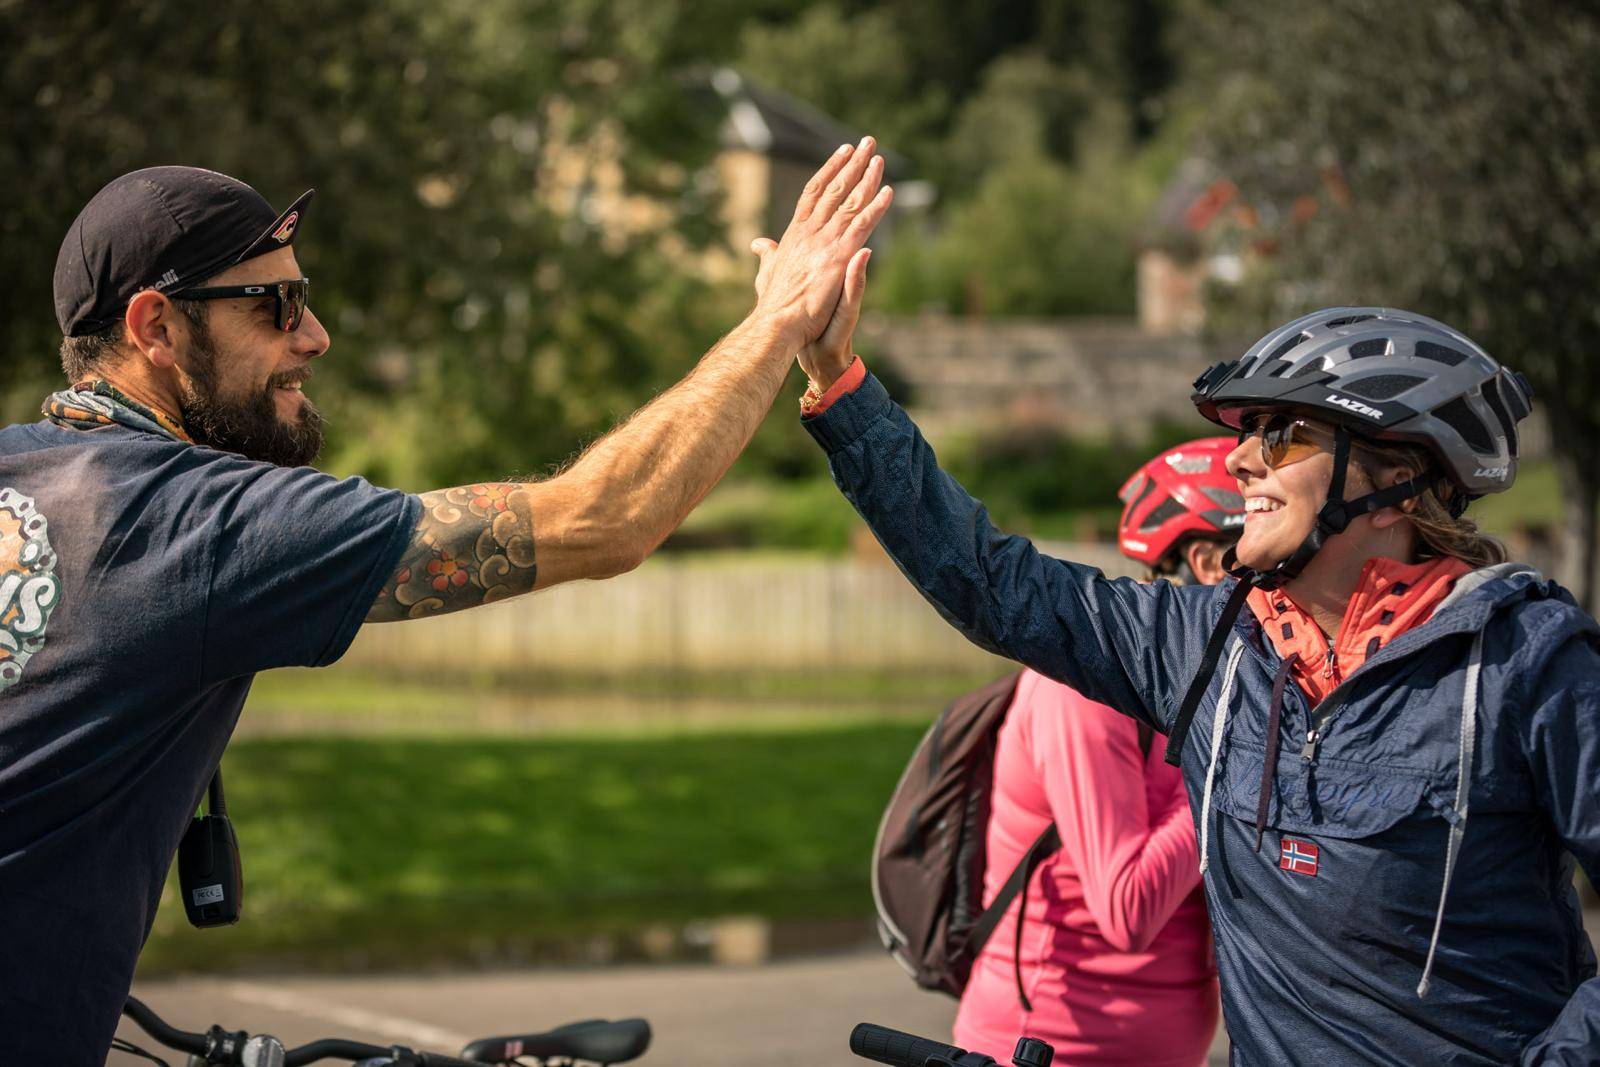 High five from Ricky's Bicycle Tours leader to a tour participant